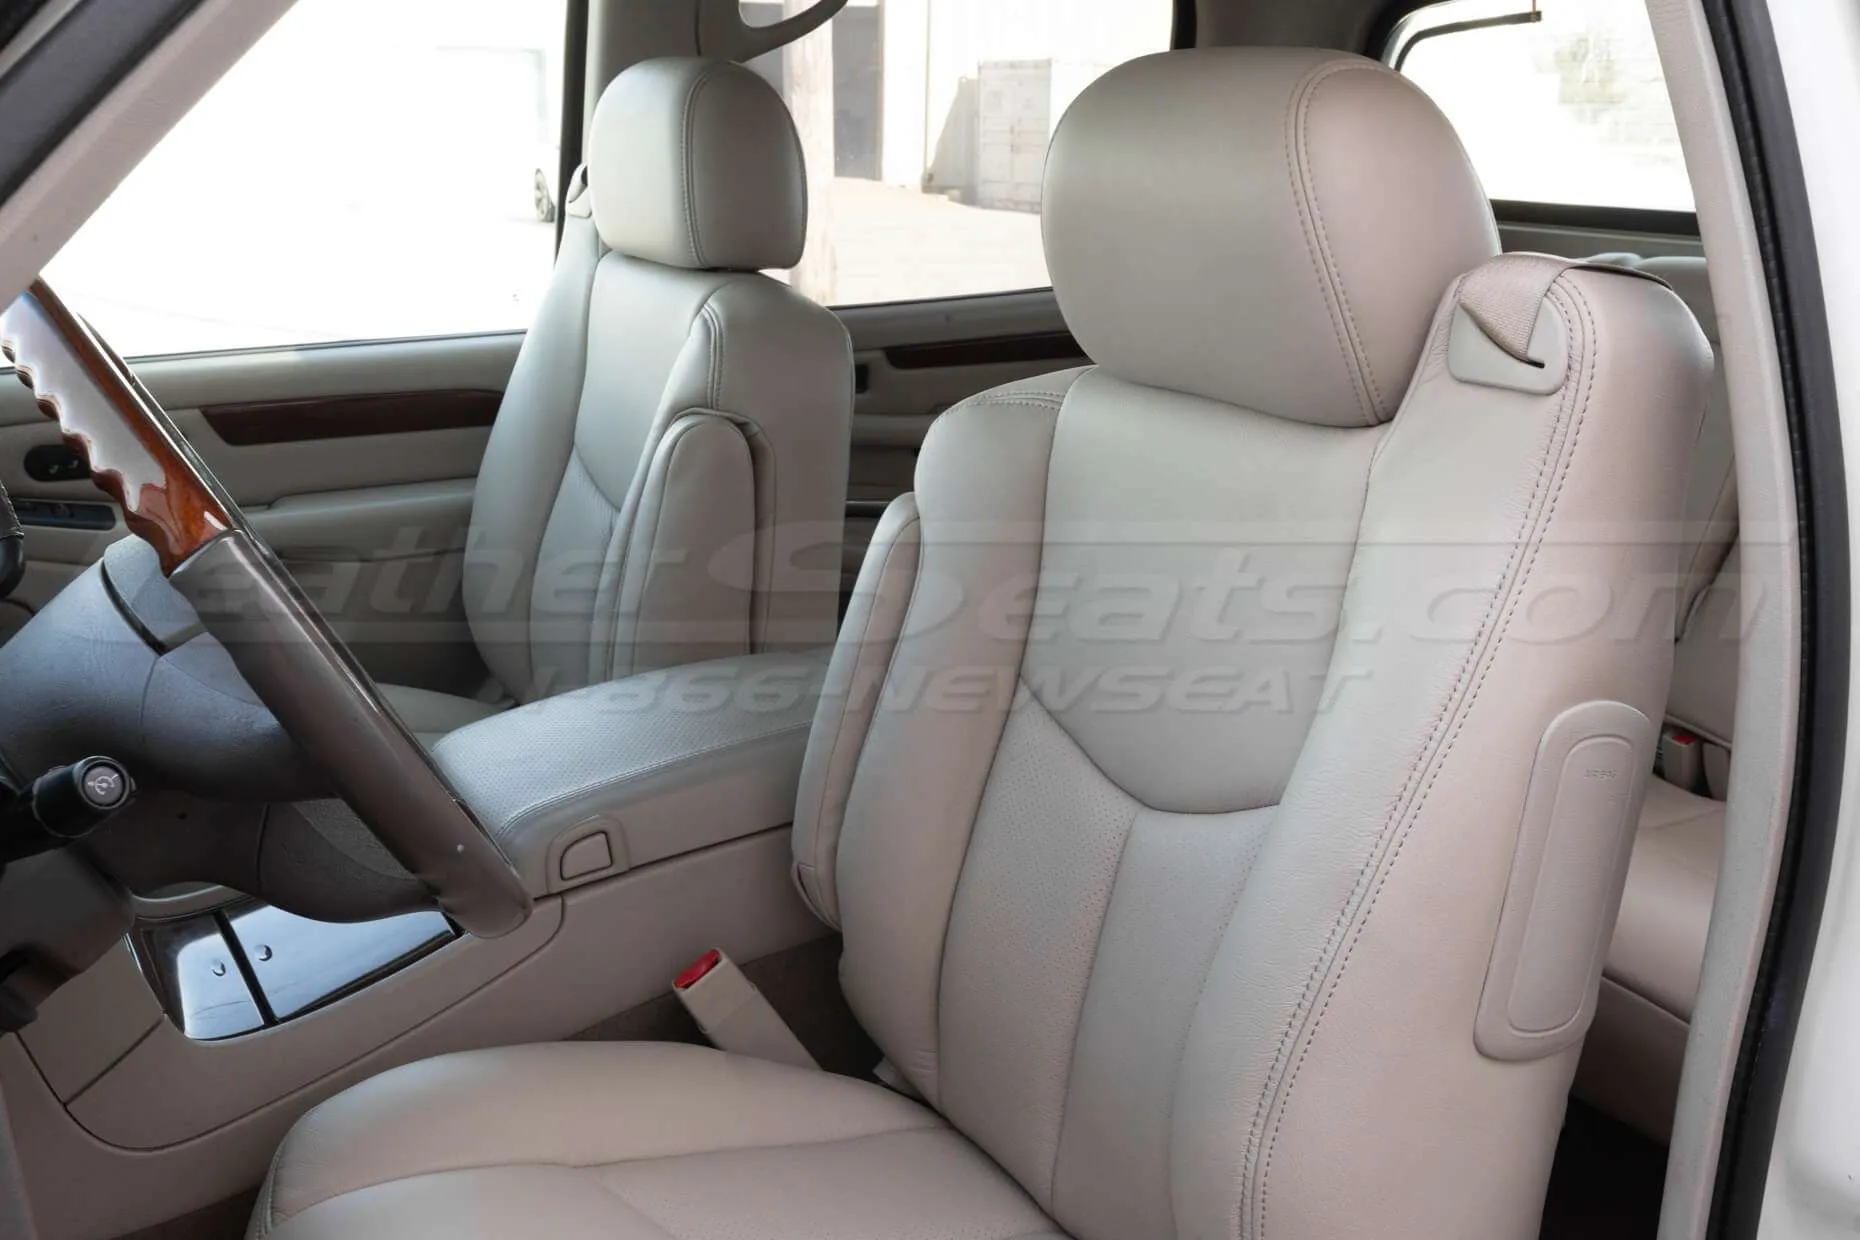 Cadillac Escalade EXT Leather Seats - Canvas - Tight of front driver seats